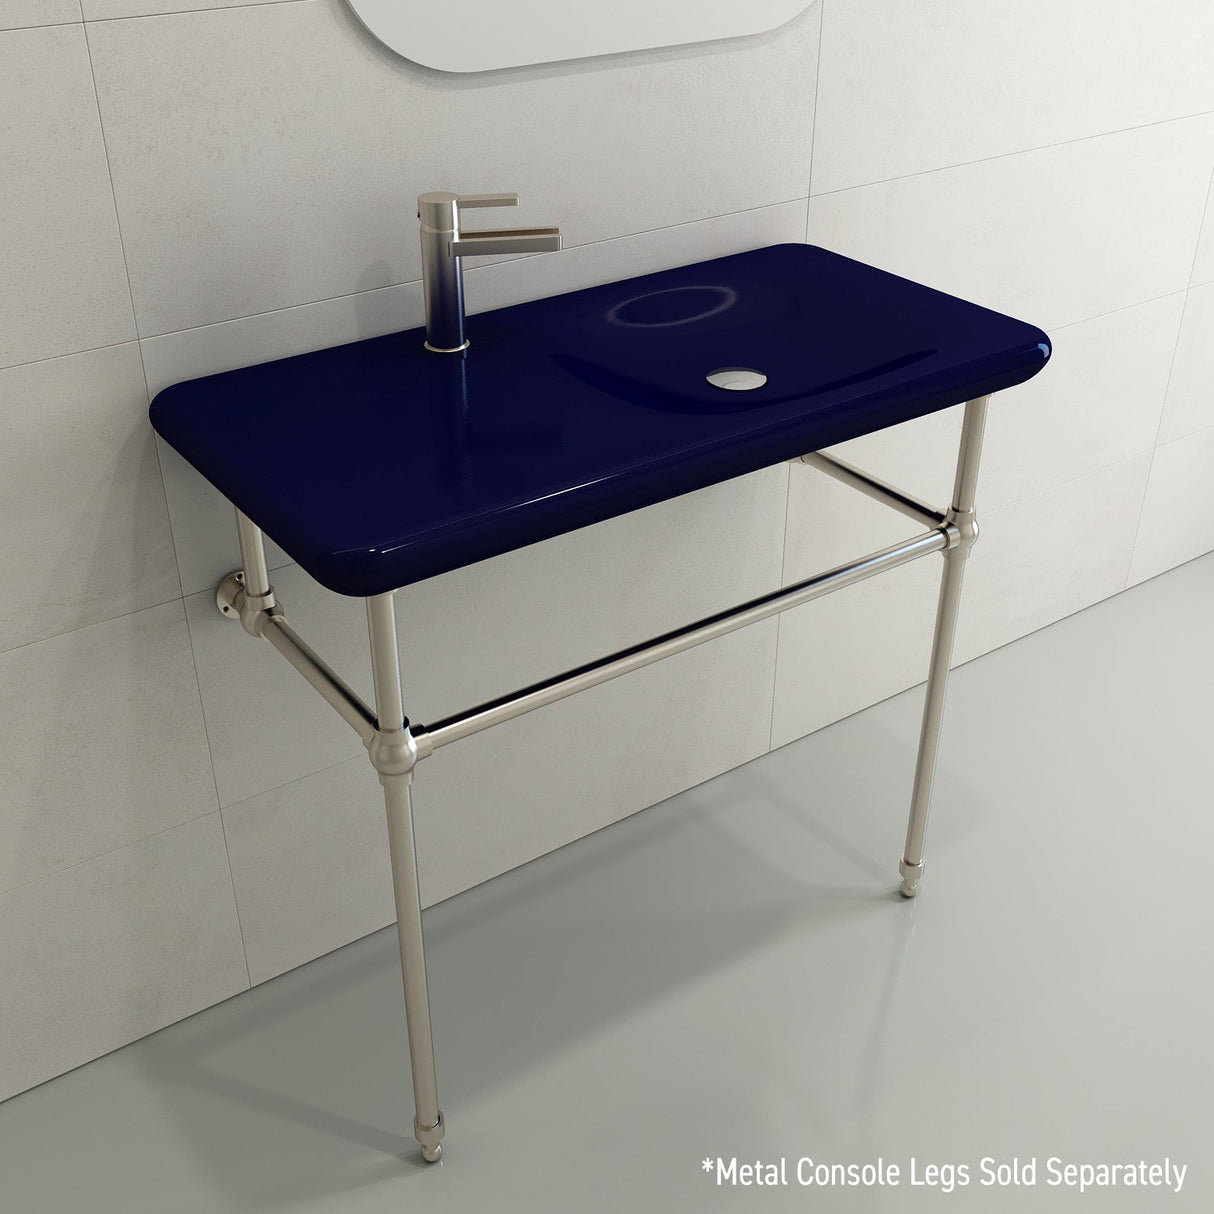 BOCCHI 1490-010-0126 Fenice Wall-Mounted Sink Fireclay 35.5 in. 1-Hole in Sapphire Blue